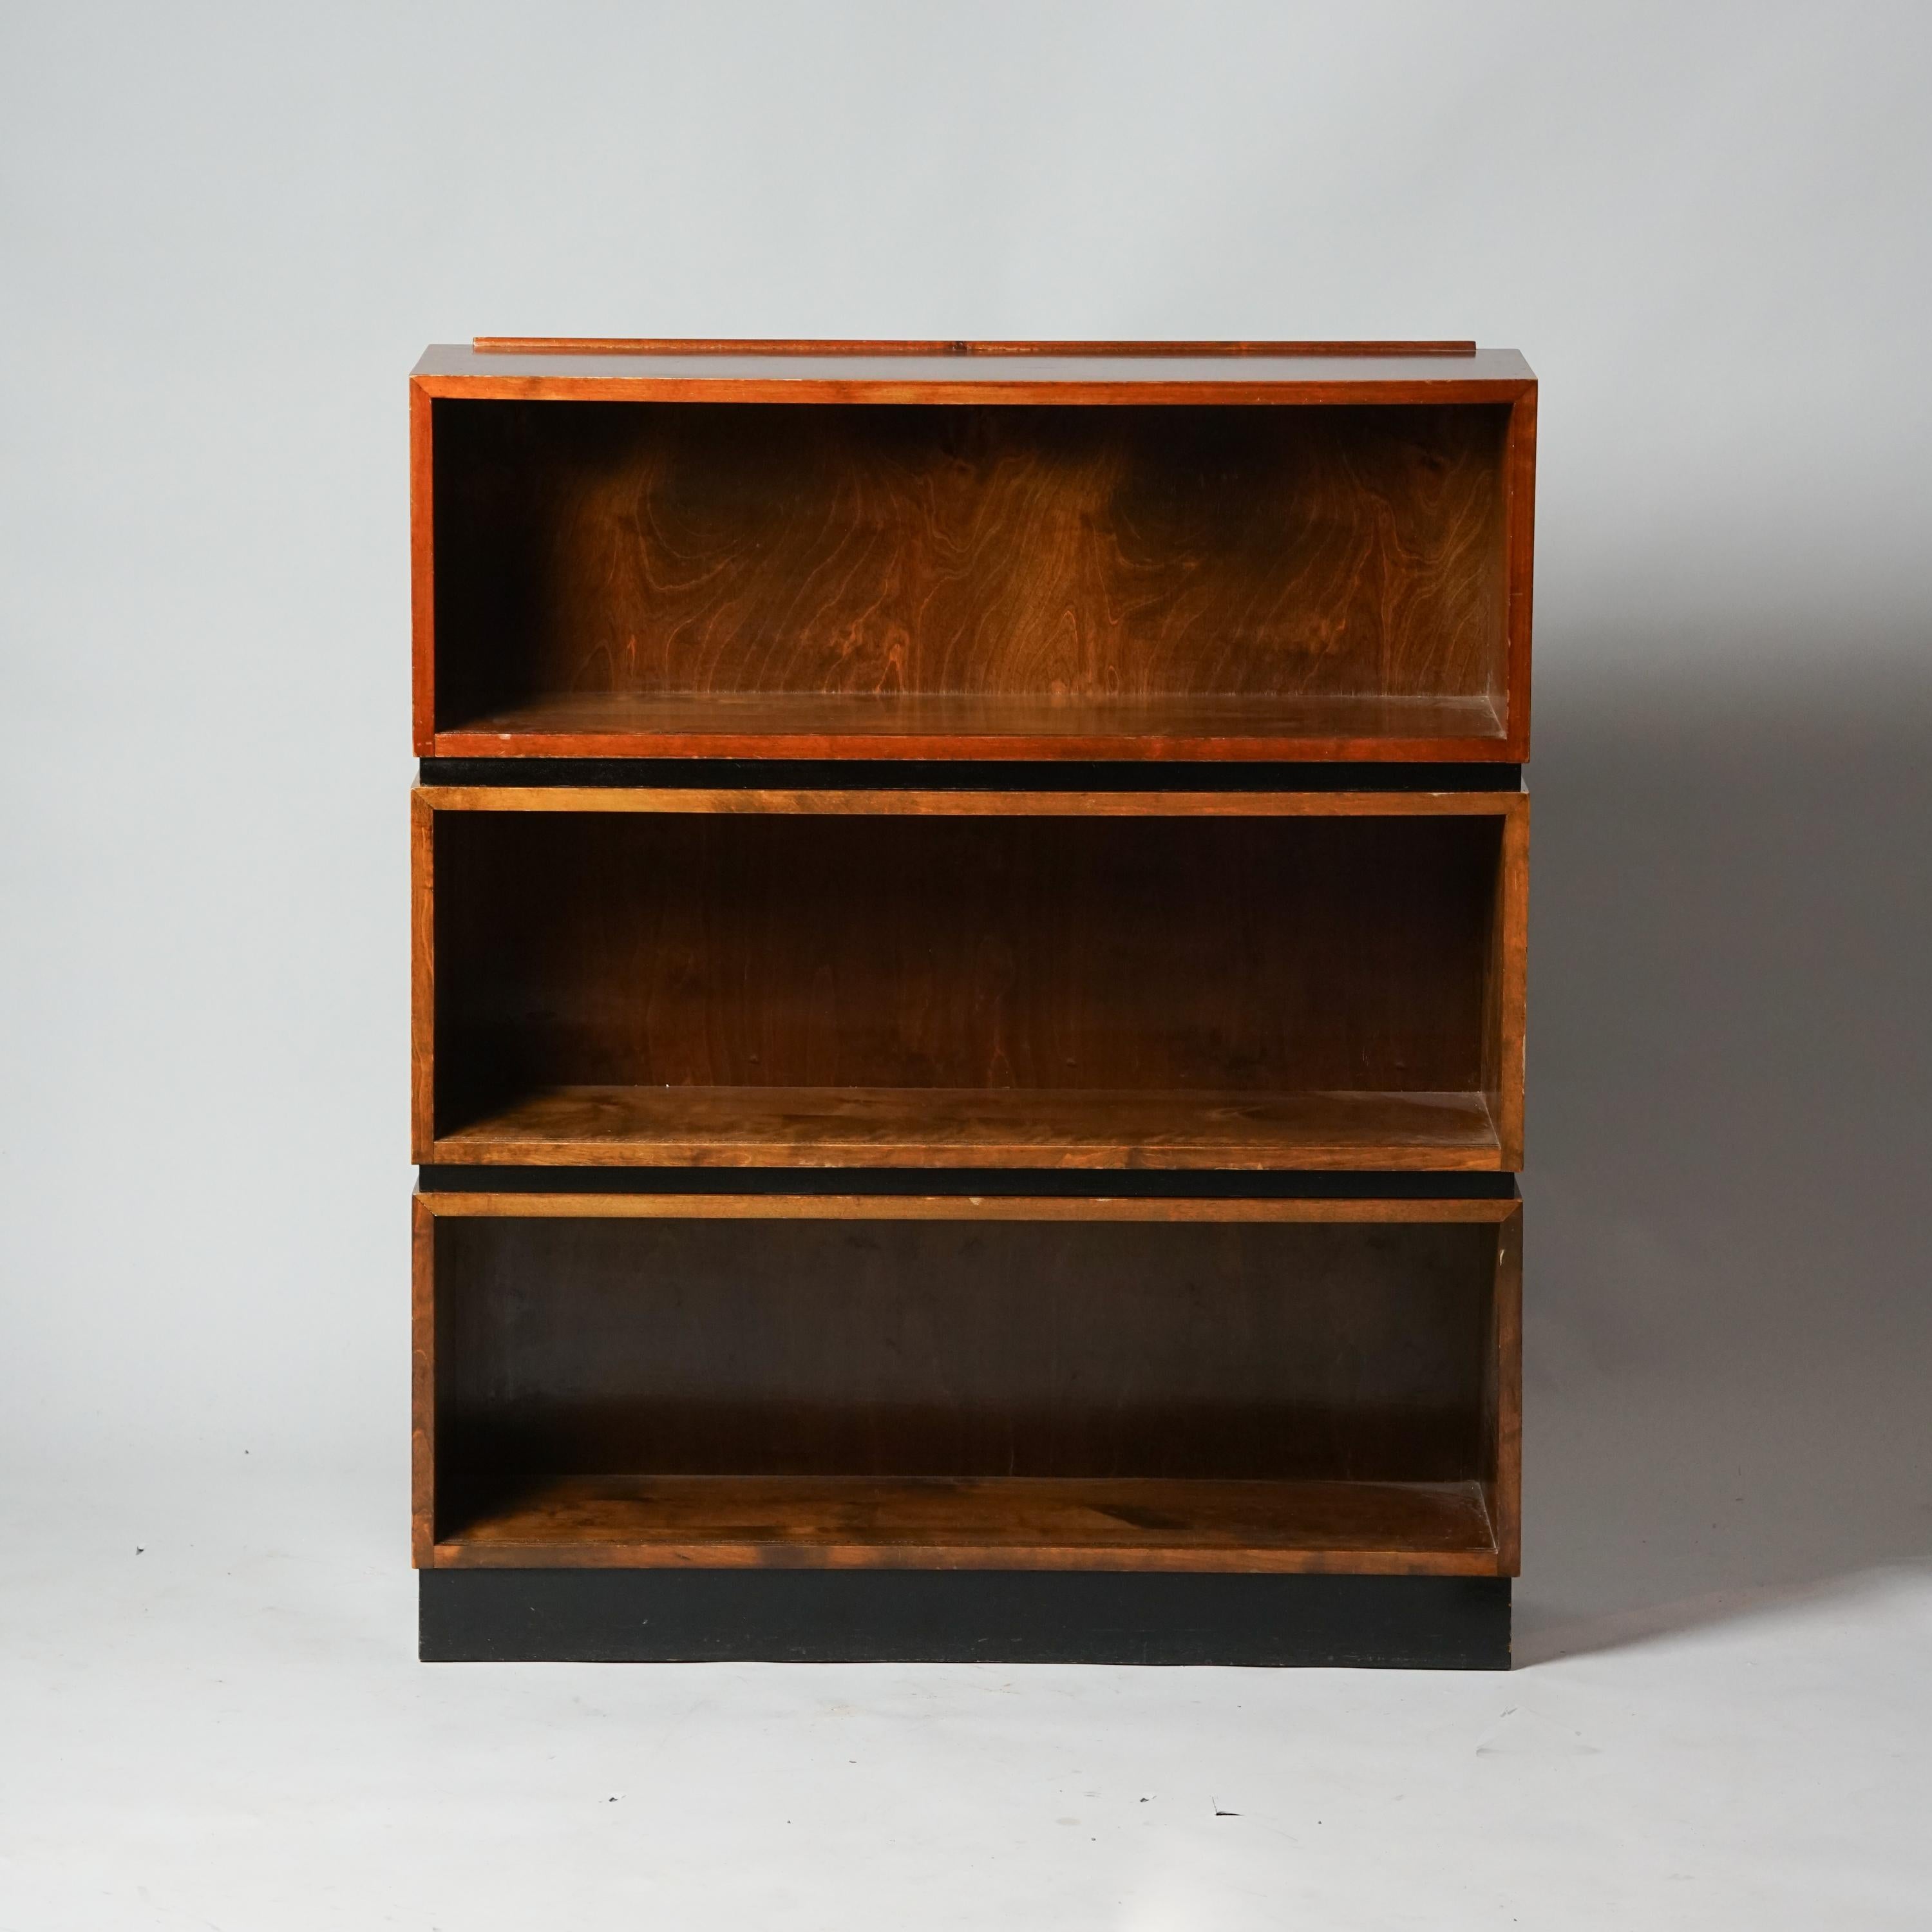 Stackable Shelves, designed by Aino Aalto, manufactured by Oy Huonekalu- ja Rakennustyötehdas Ab, 1940s. Stained birch. The shelves are sold as a set of three. Good vintage condition, minor patina and wear consistent with age and use. 
Measurements: